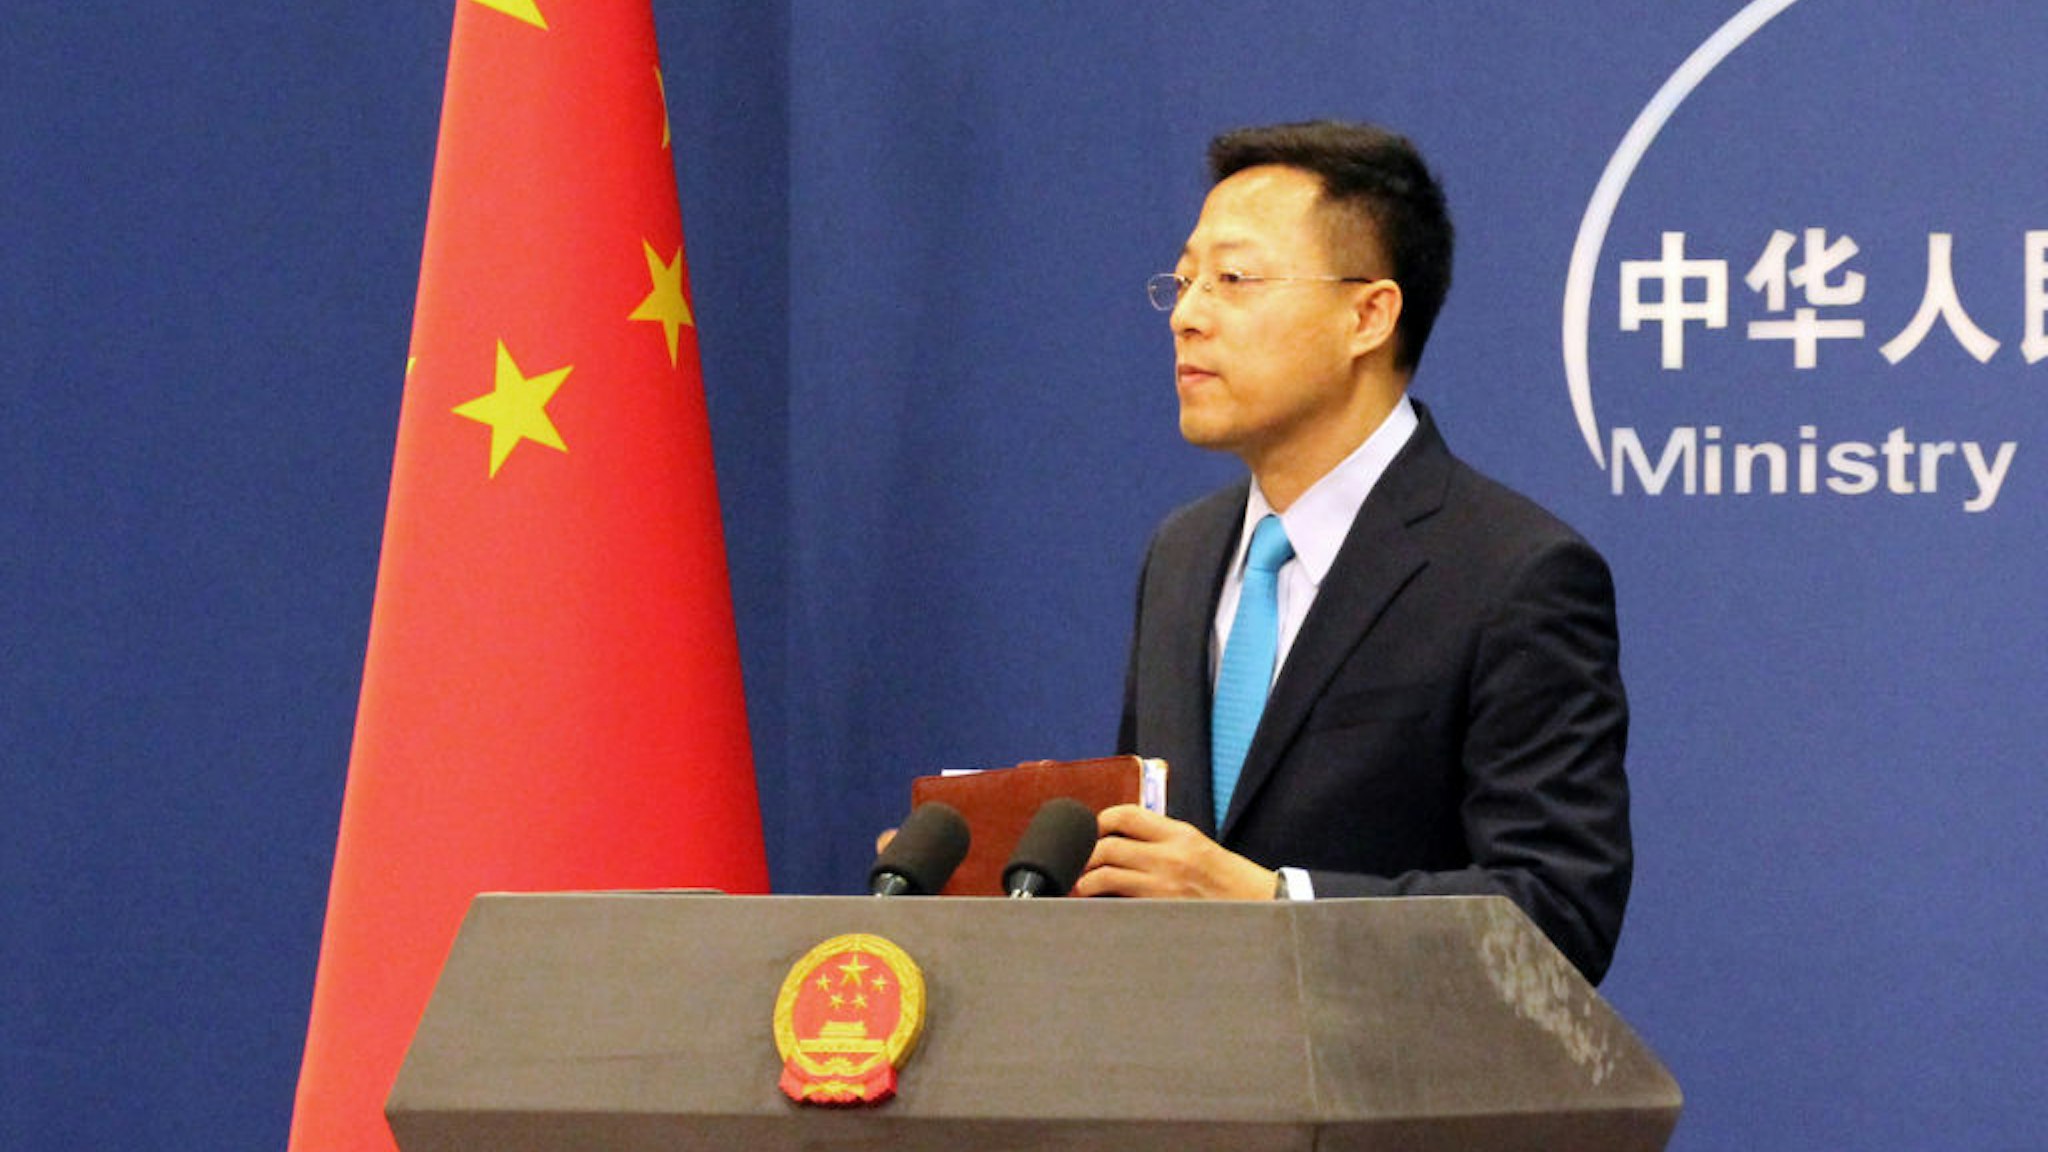 Chinese Foreign Ministry Spokesman Zhao Lijian during his first regular press briefing at the Chinese Foreign Ministry; on February 3-21, the Ministry's regular briefings were held online amid the COVID-19 coronavirus outbreak.